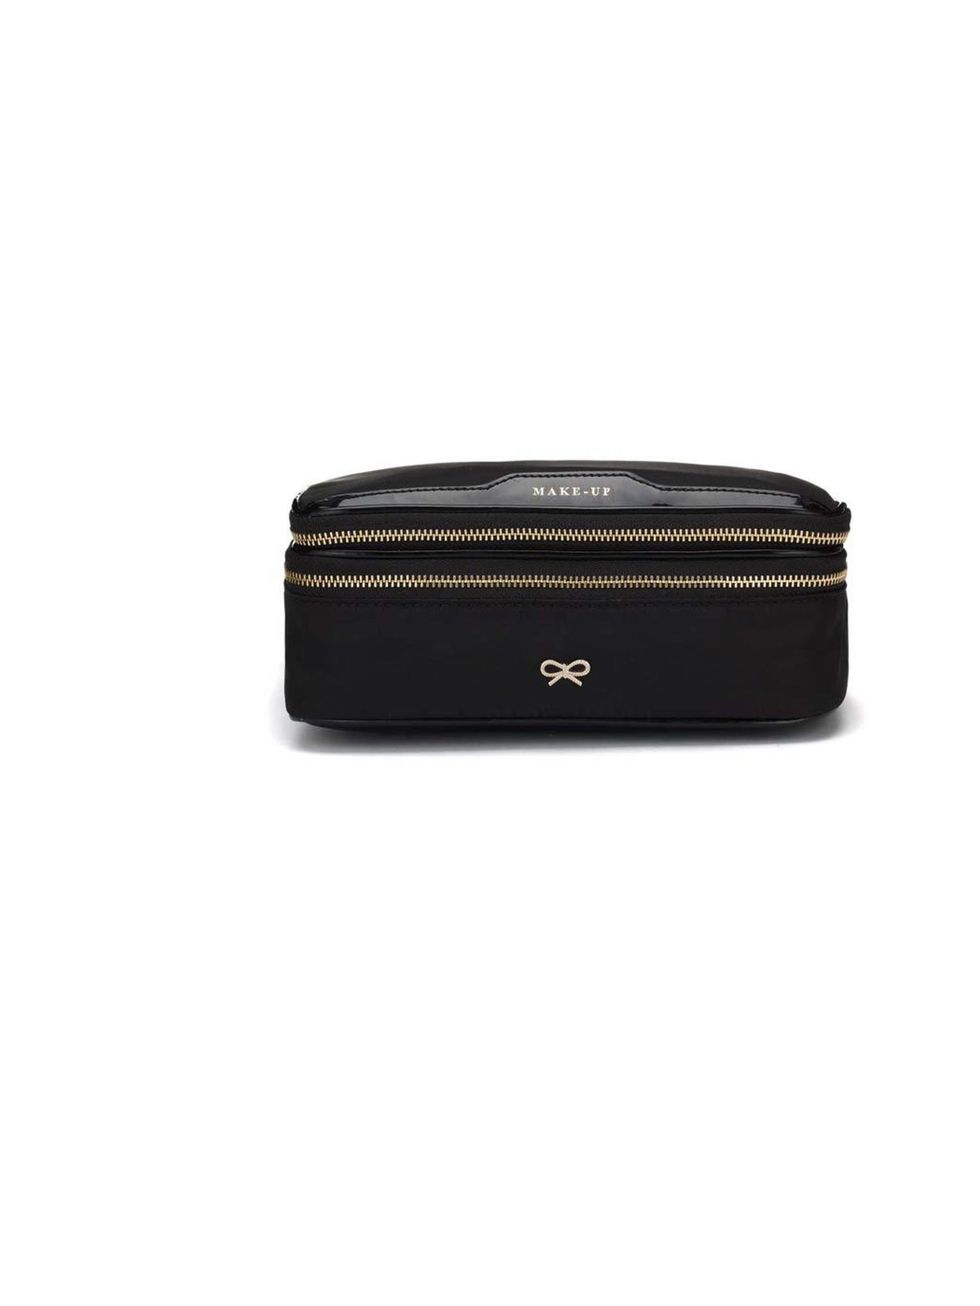 <p>Make-up Bag, £175 by <a href="http://www.anyahindmarch.com/prod/Beauty/Accessories/Make-up/41917/">Anya Hindmarch</a></p>